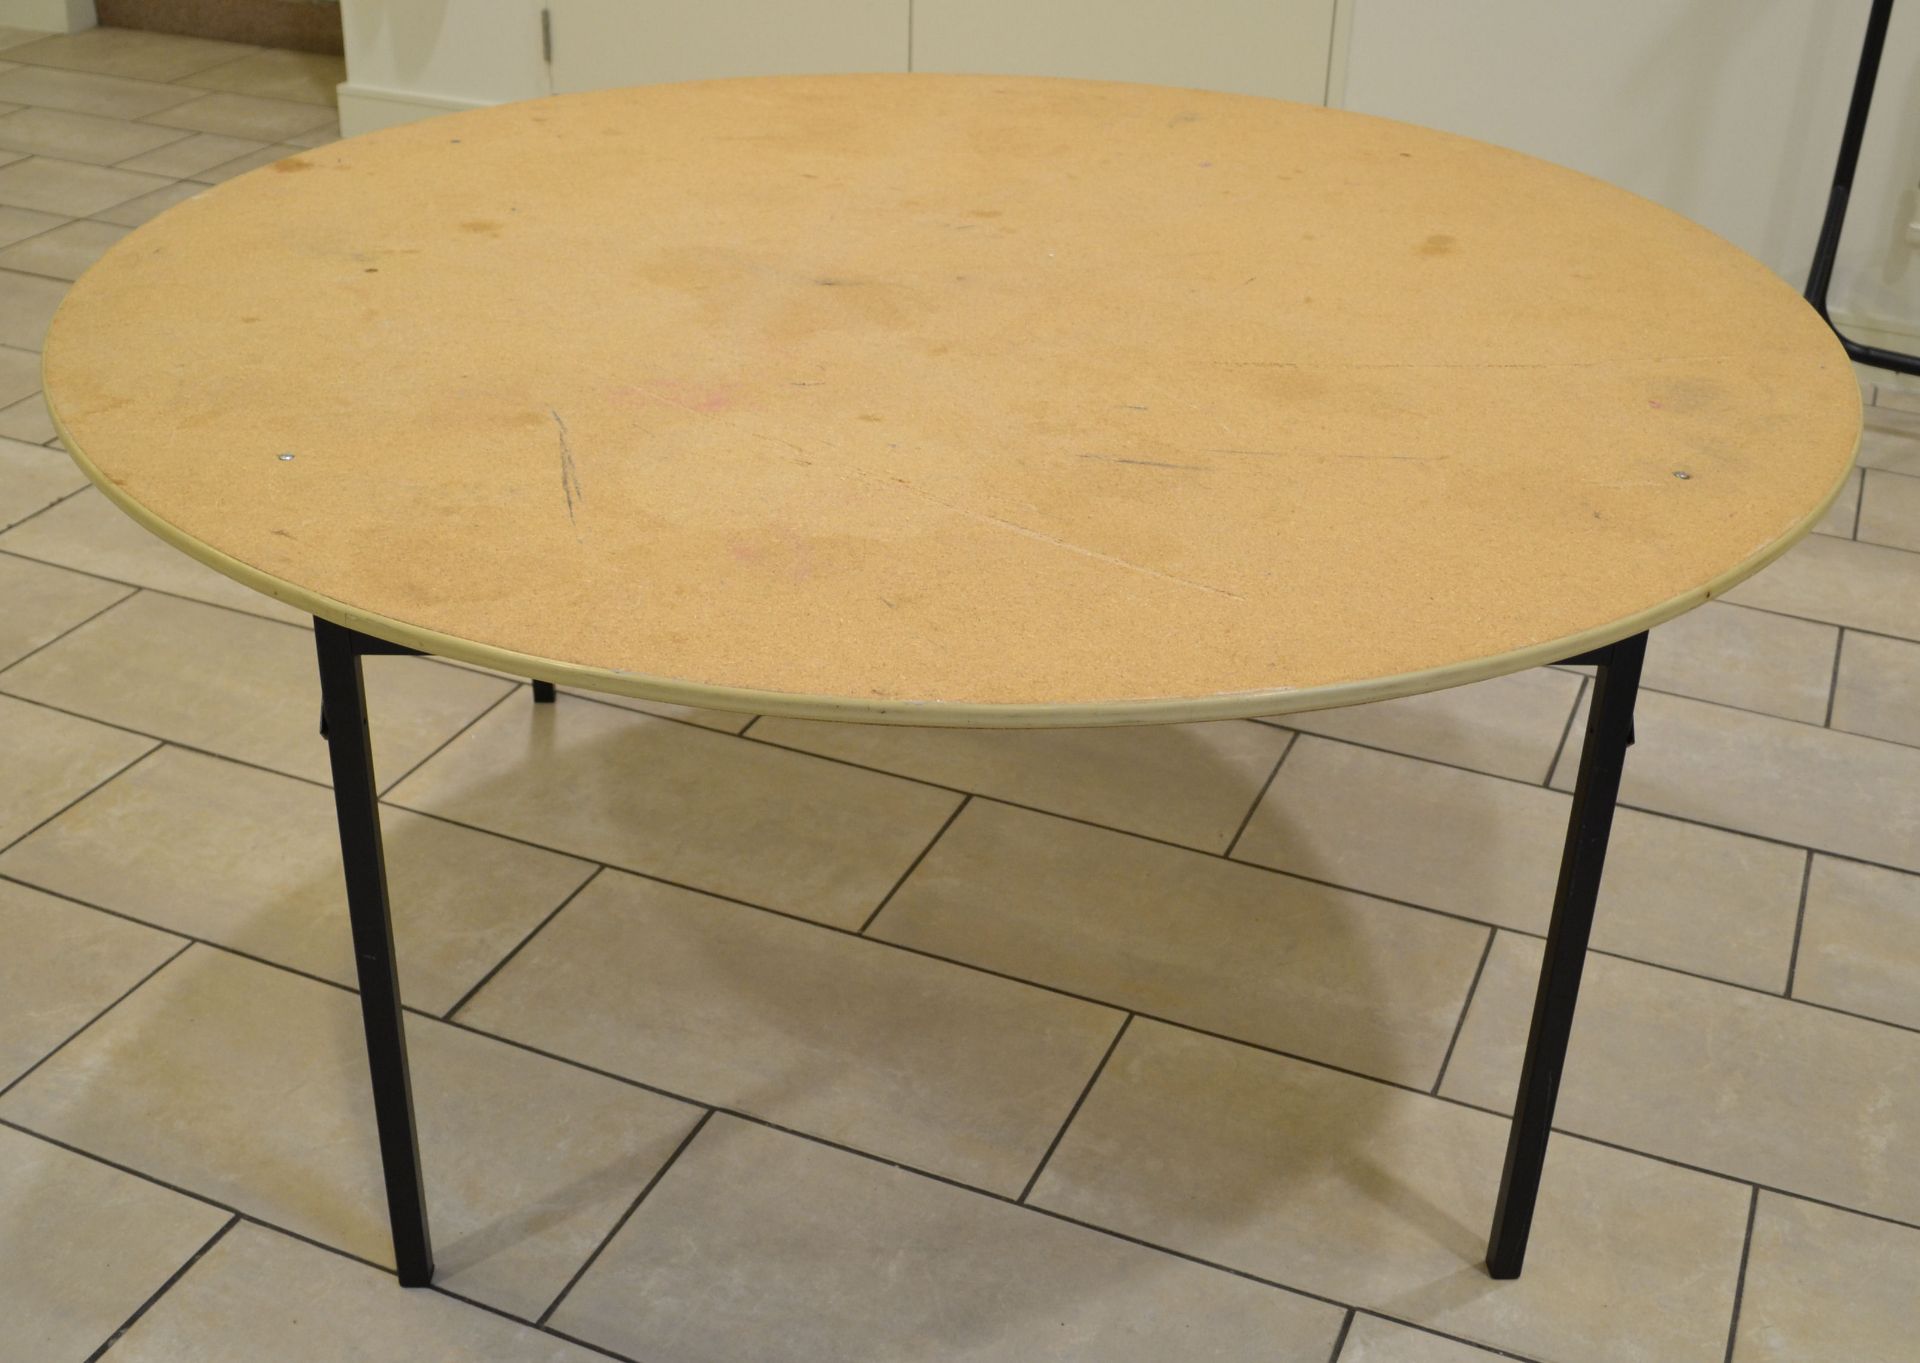 4 x 5 Foot Folding Round Banqueting Tables - CL152 - Location: Altrincham WA14 With a rubber-edged